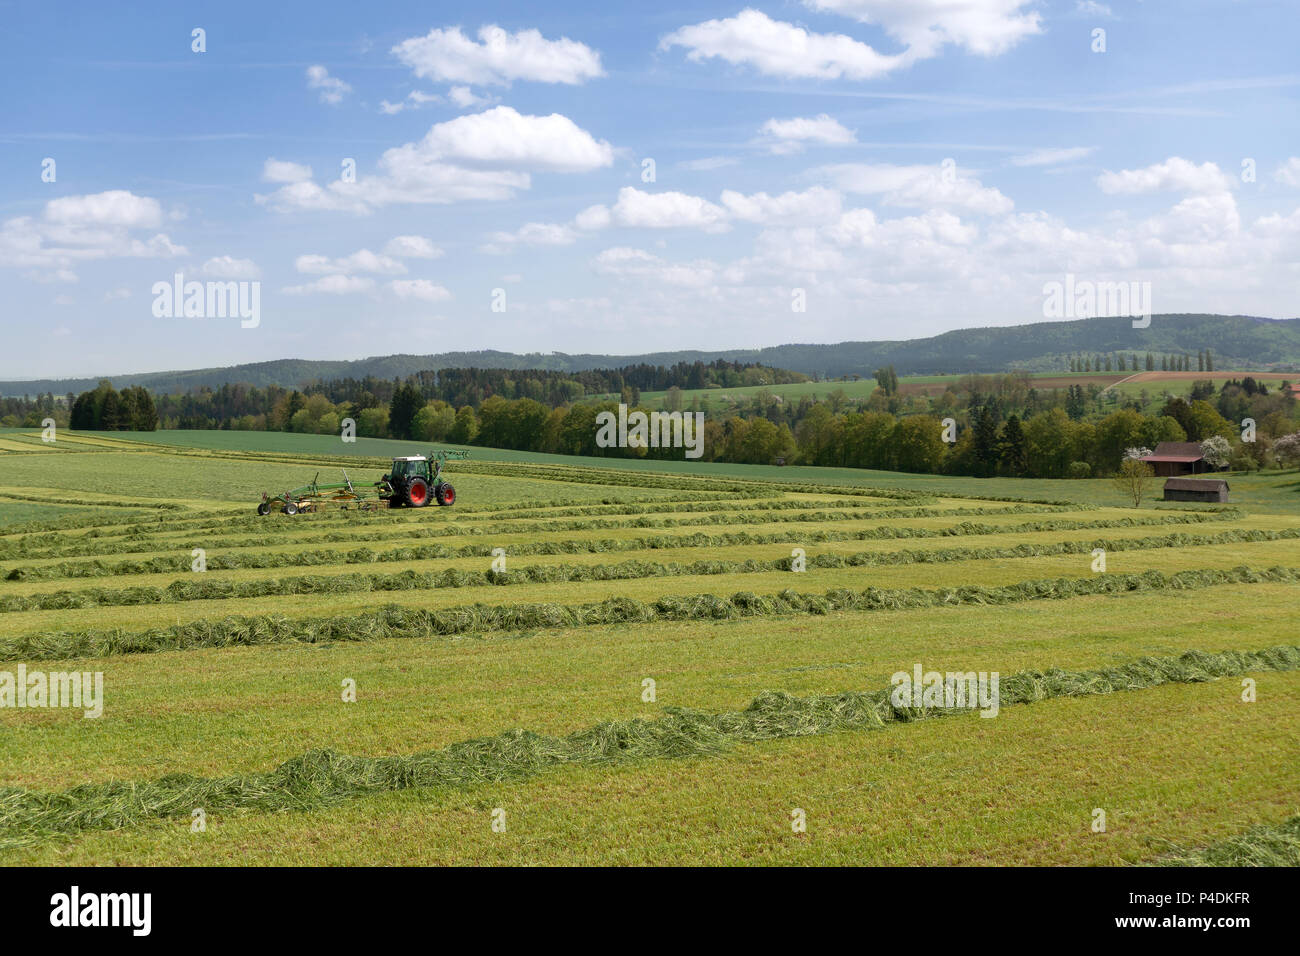 Tractor at harvest of green fodder Stock Photo